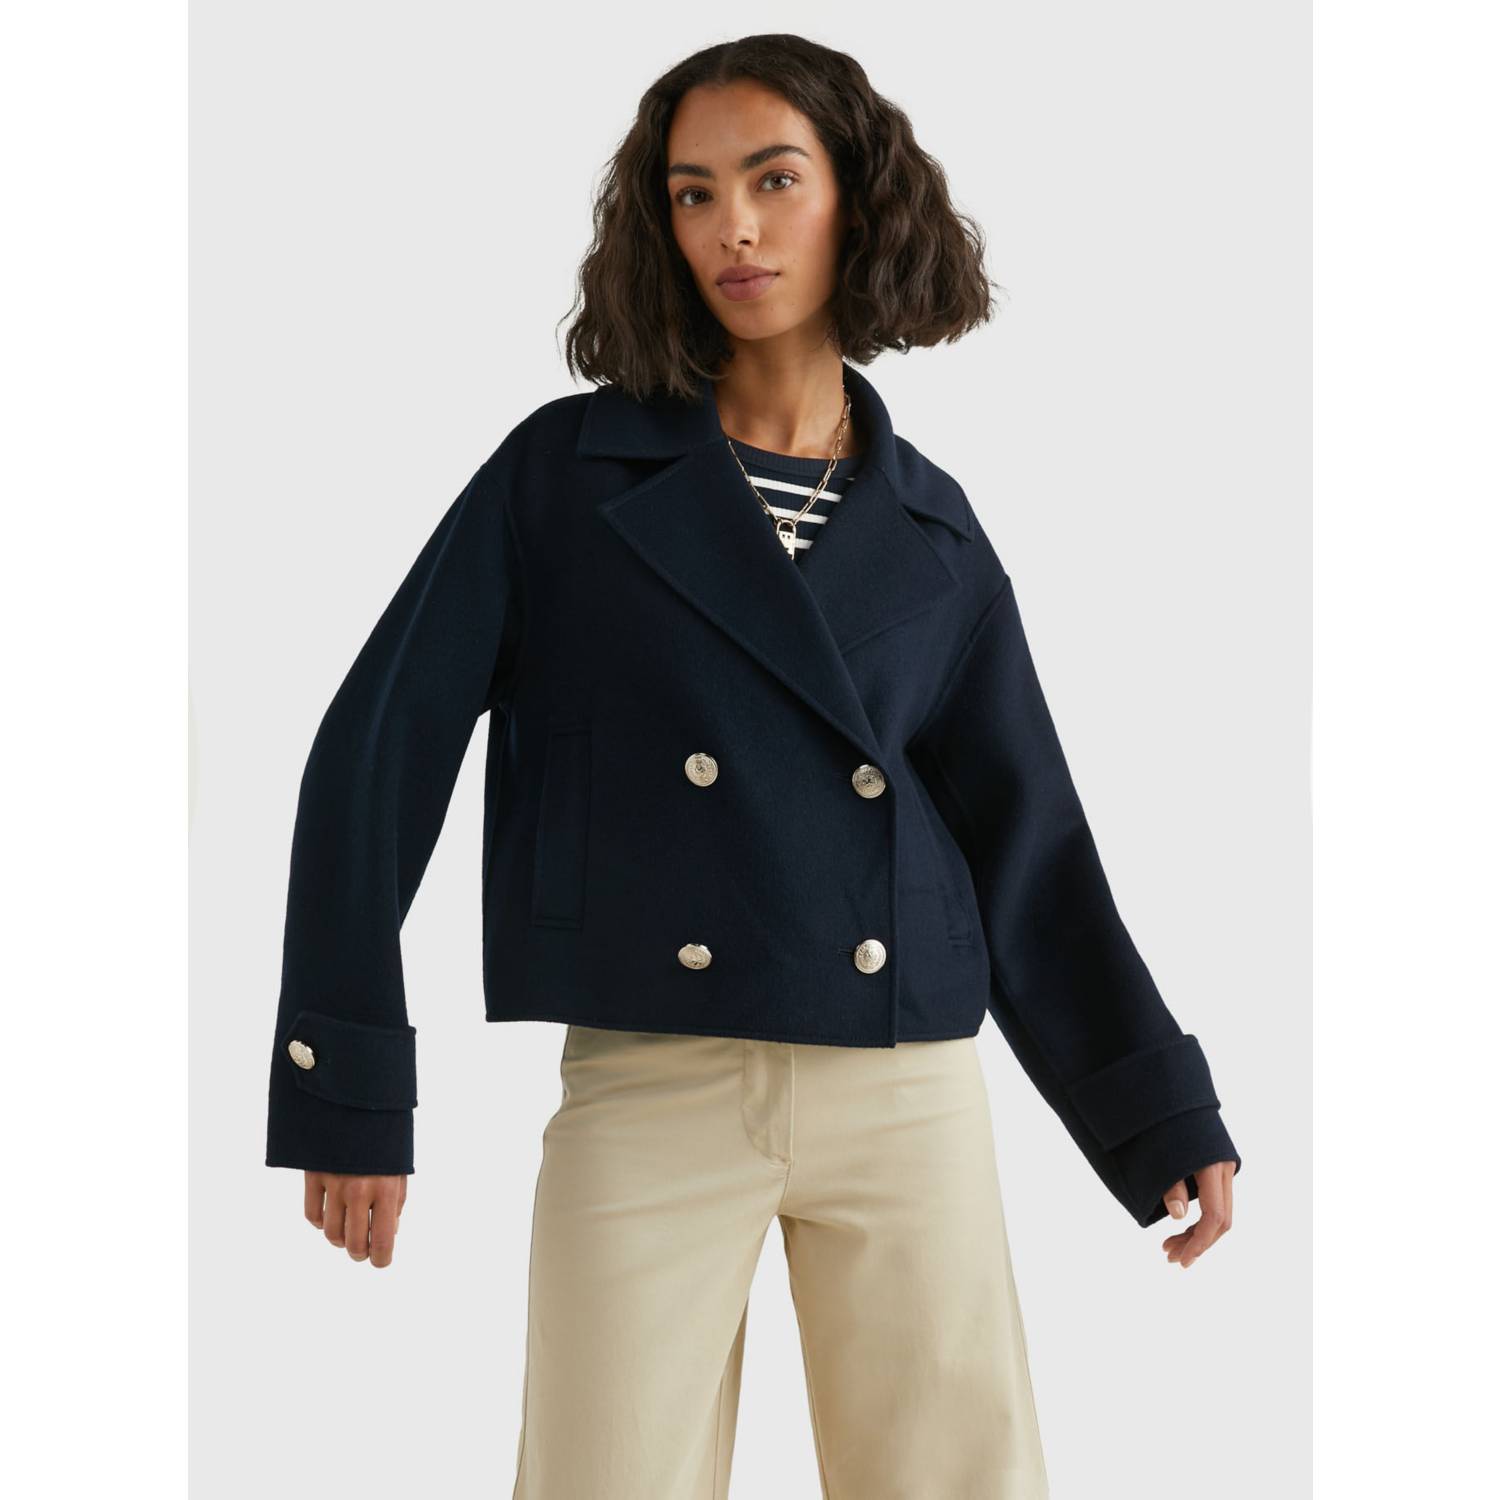 Paquete De 3 Hipsters Mujer Azul Tommy Hilfiger - tommycolombia